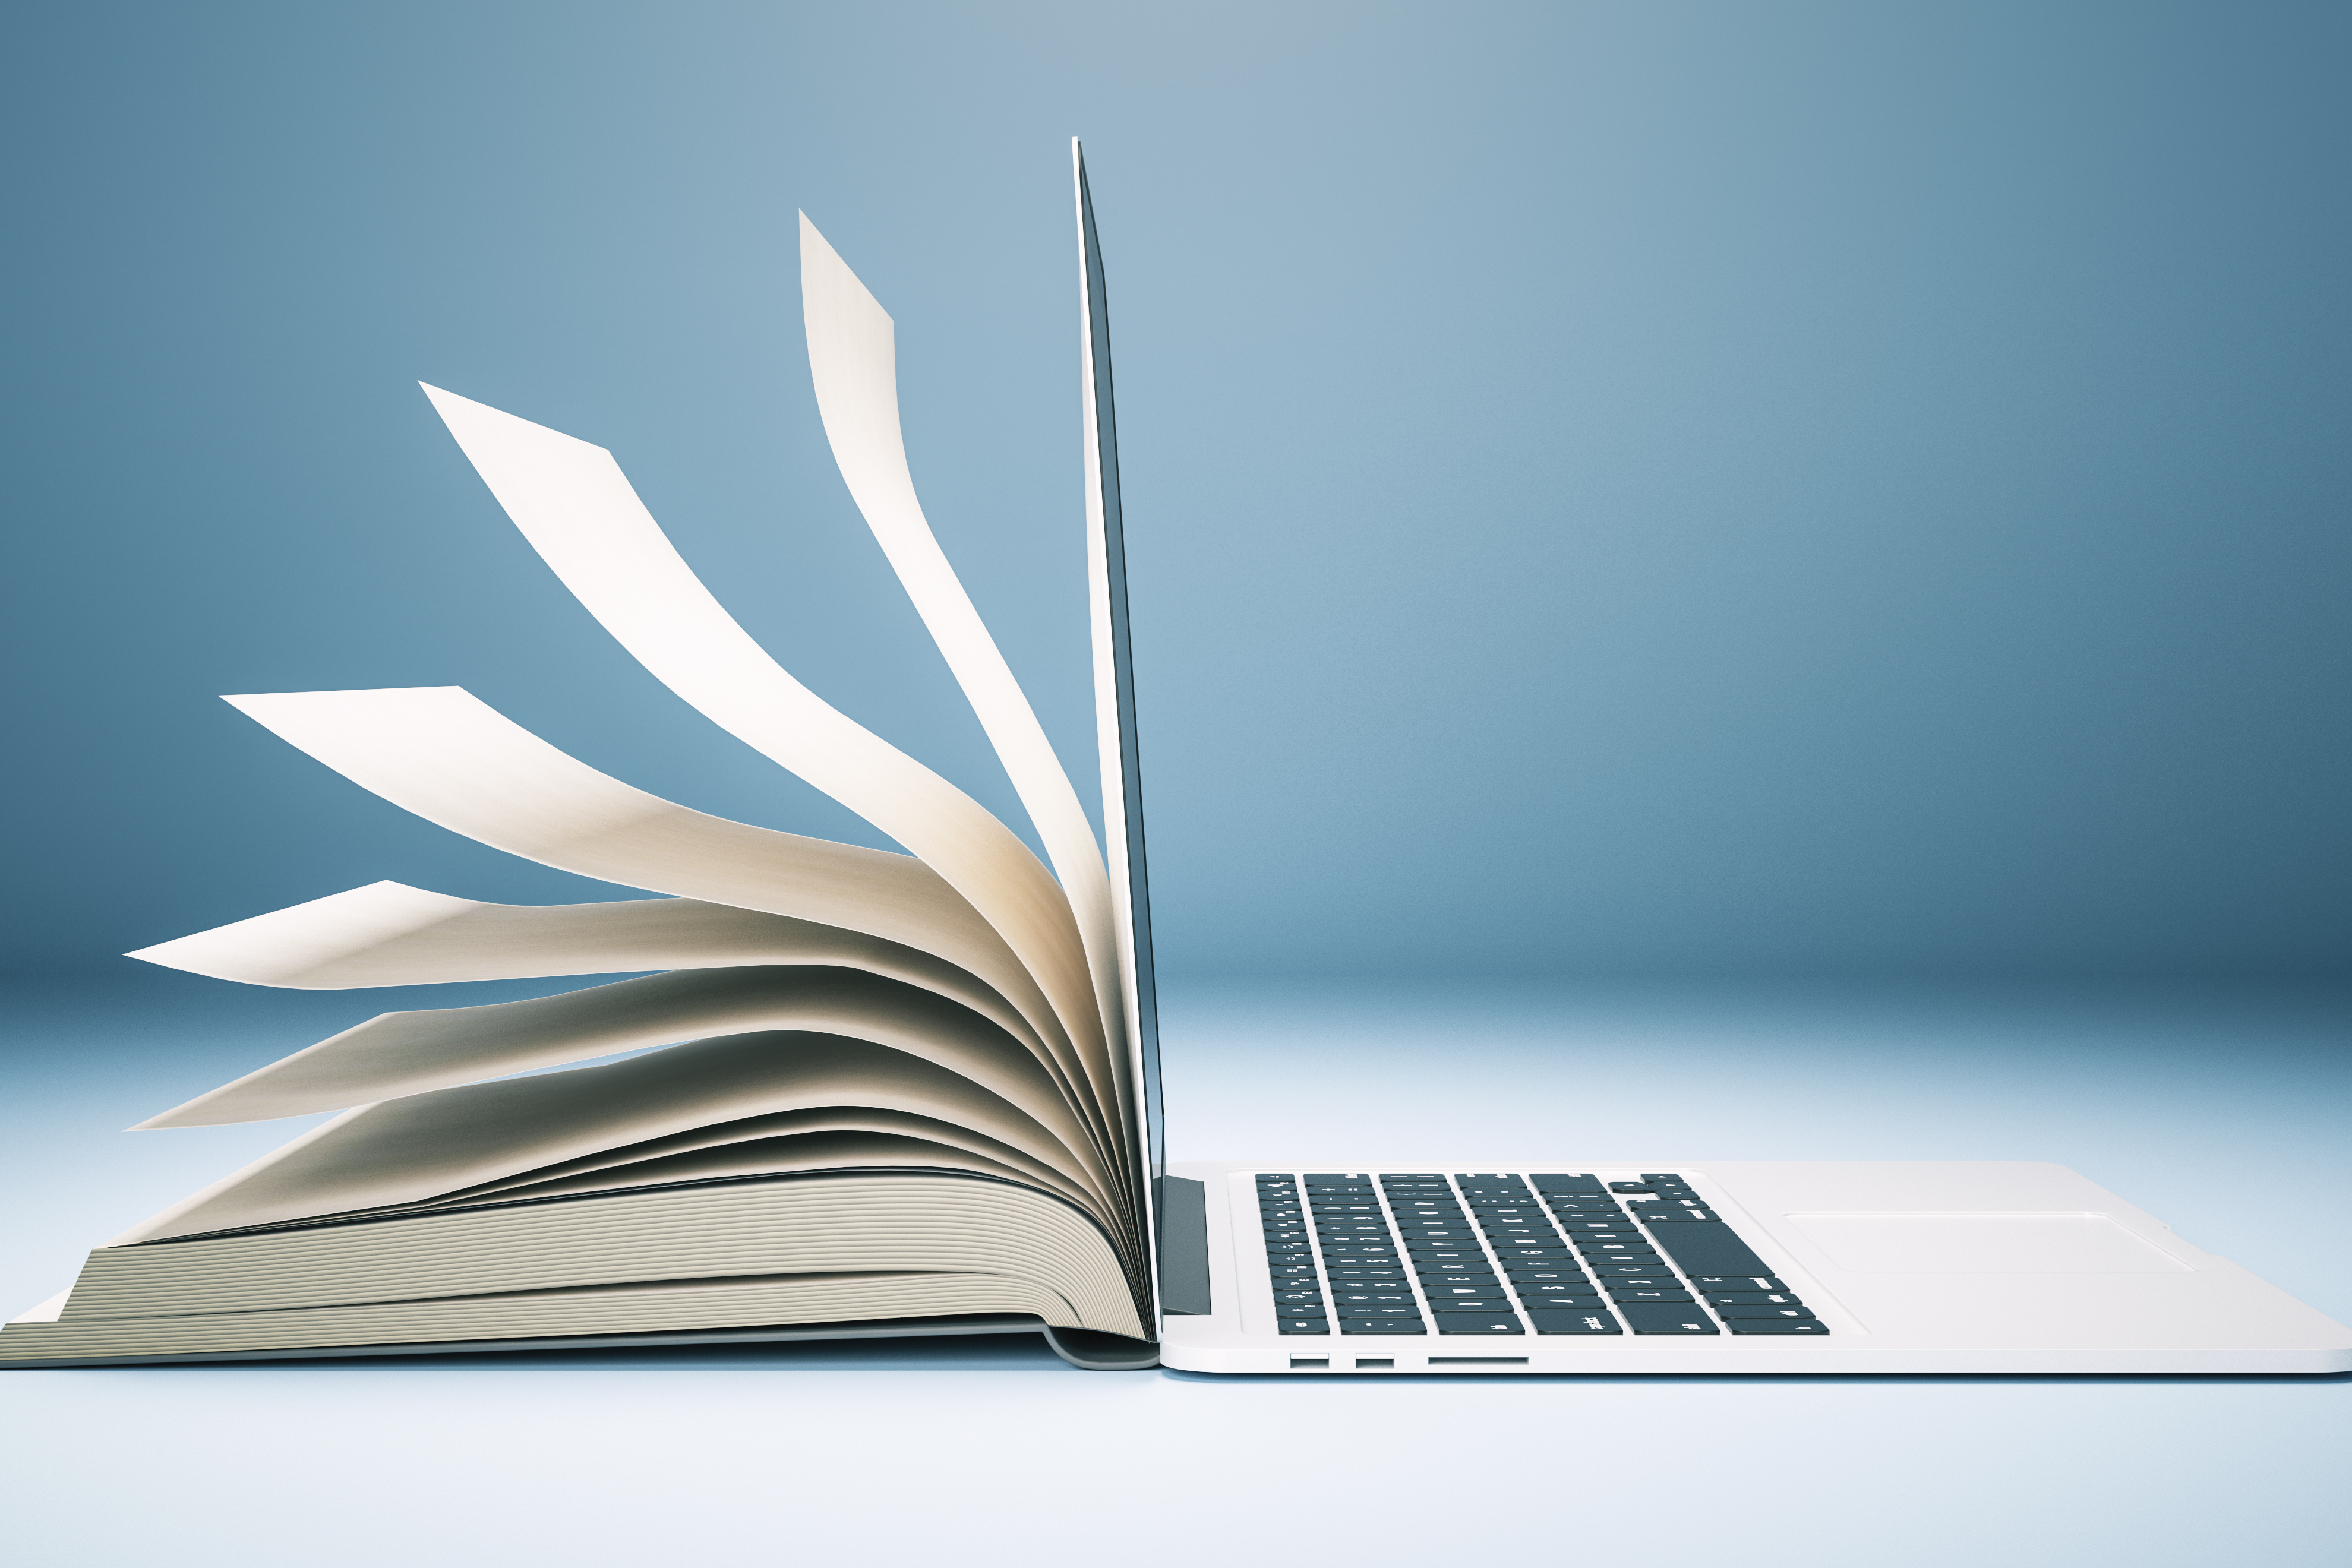 an image of an open book and an open laptop, back to back